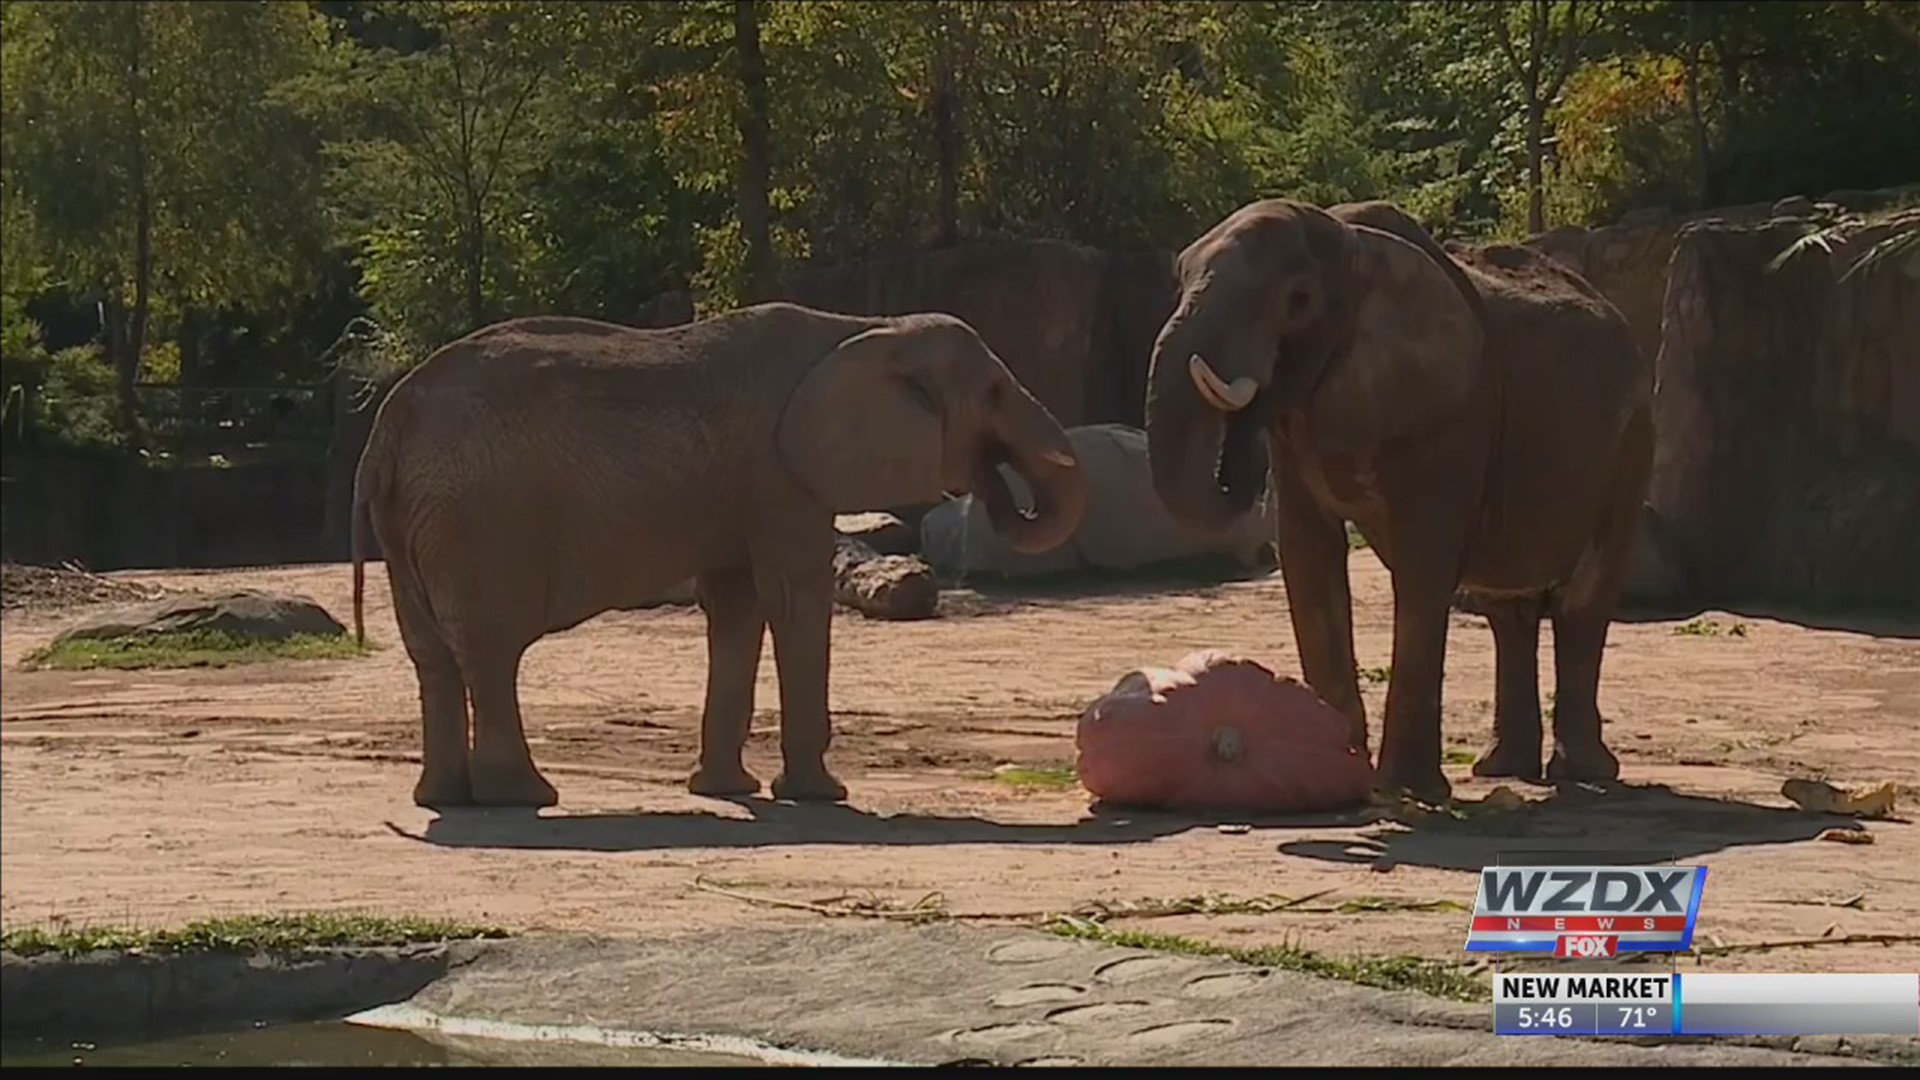 Some elephants at an Ohio zoo got to celebrate fall by chowing down on a 1,300 pound pumpkin.